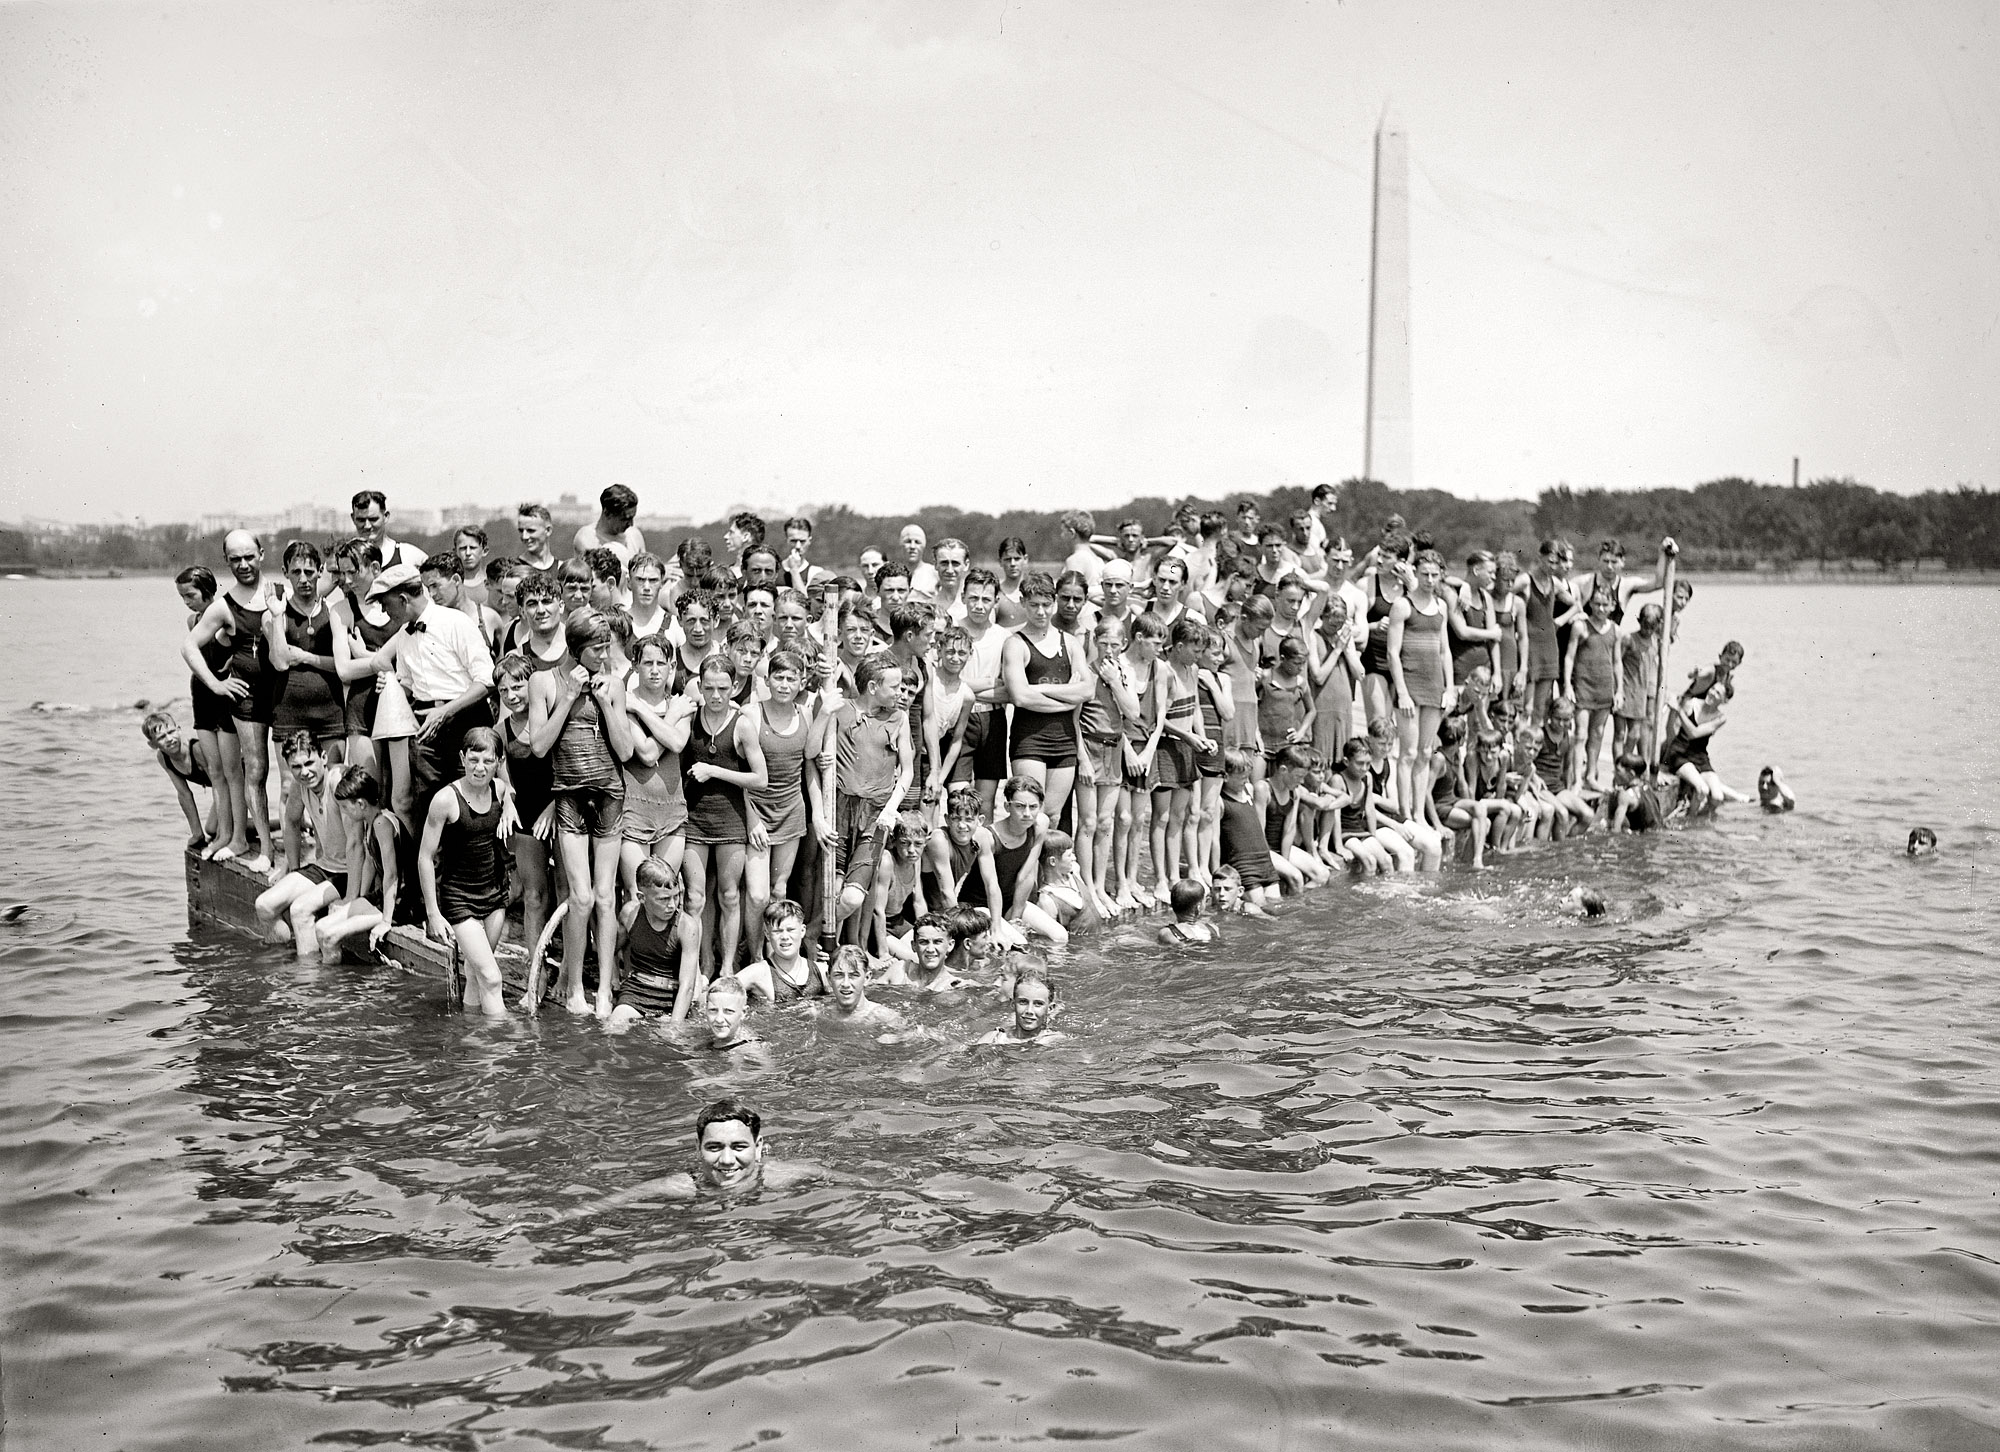 August 7, 1924. "Warren Kealoha, Hawaiian Olympic swimmer, at Tidal Basin." Warren, closest to the camera, won the gold in the men's 100-meter backstroke in 1920 and 1924. National Photo Company glass negative. View full size.